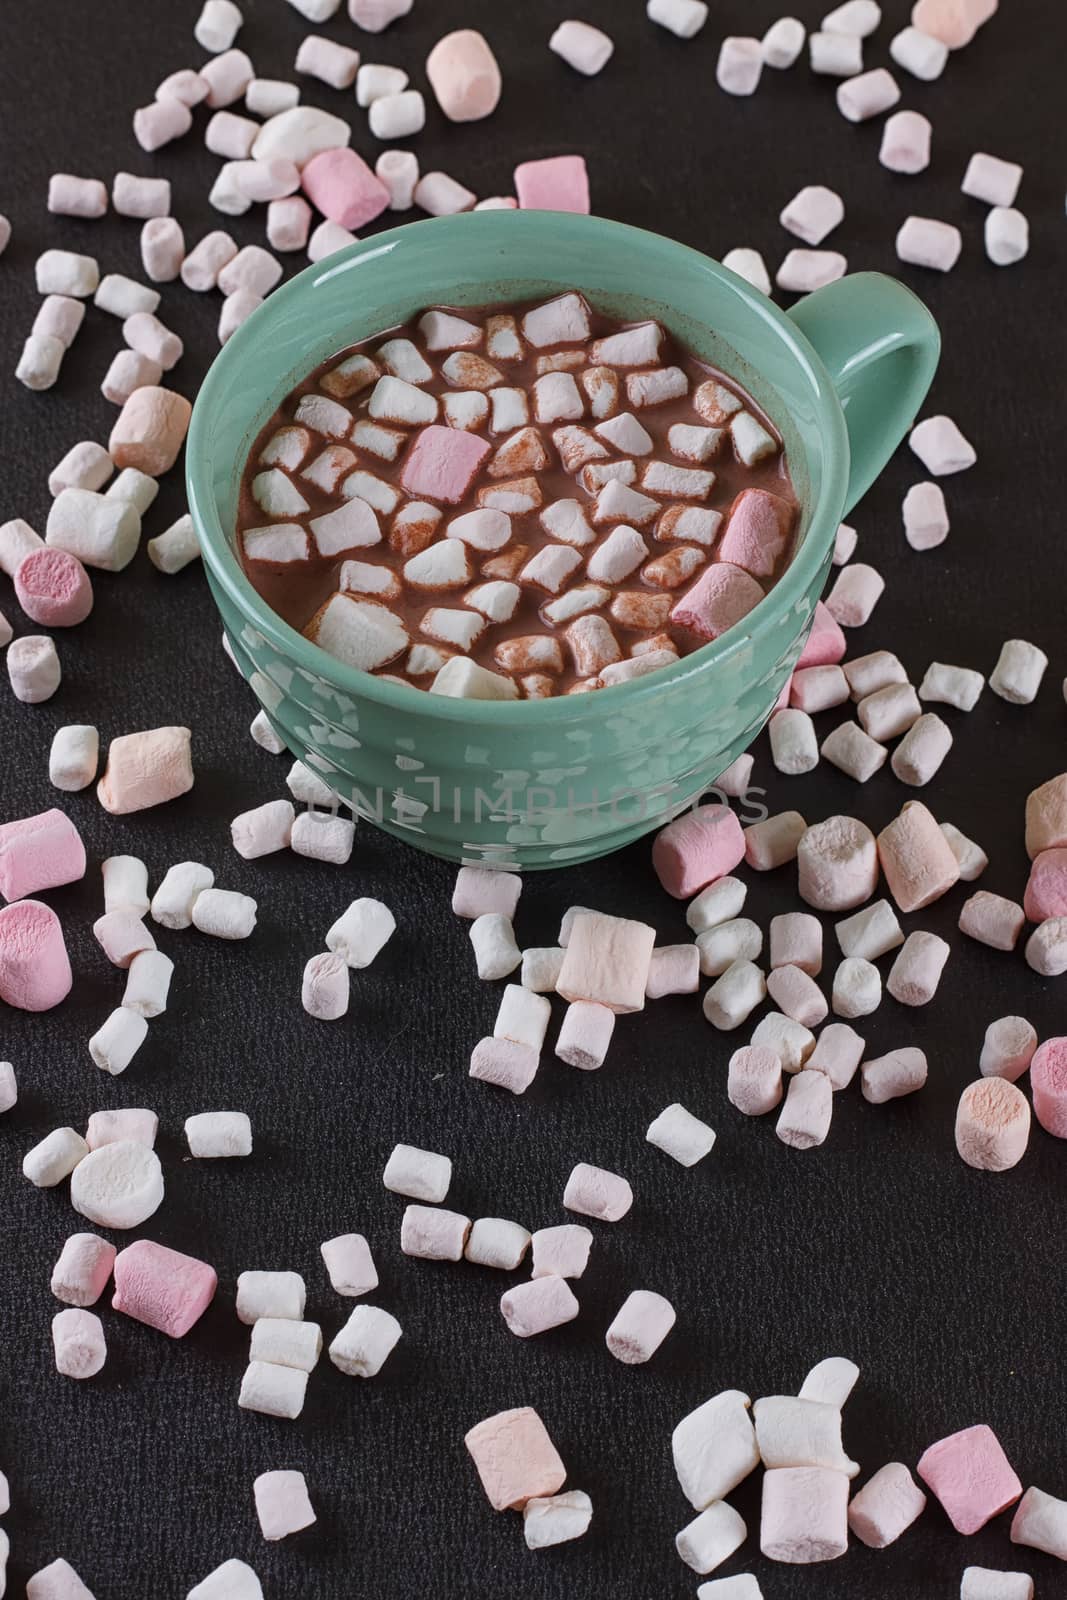 Hot chocolate in a green cup with marshmallows scattered around. Black background